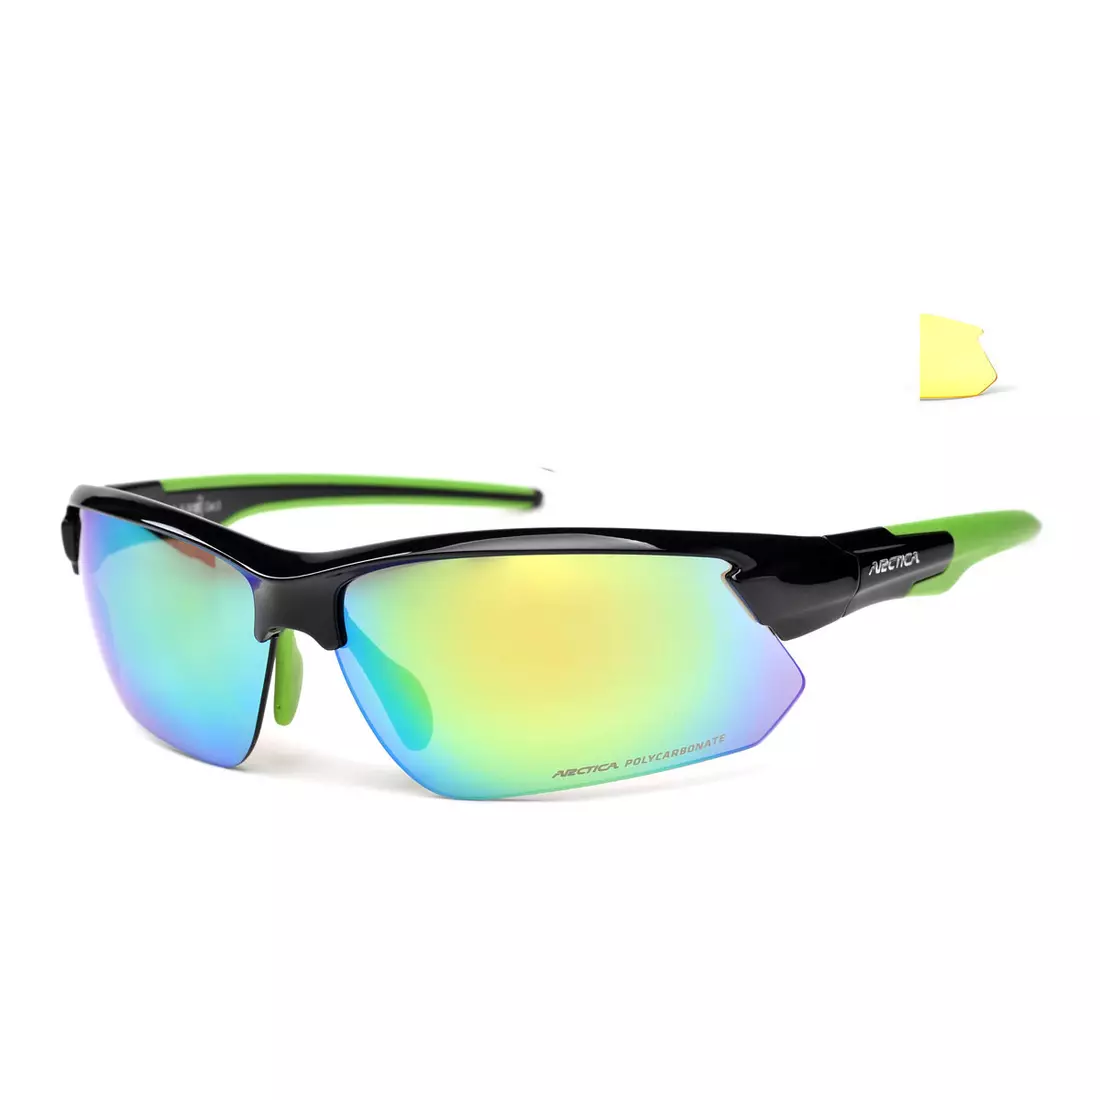 ARCTICA S 293B cycling/sports glasses. Replaceable lenses